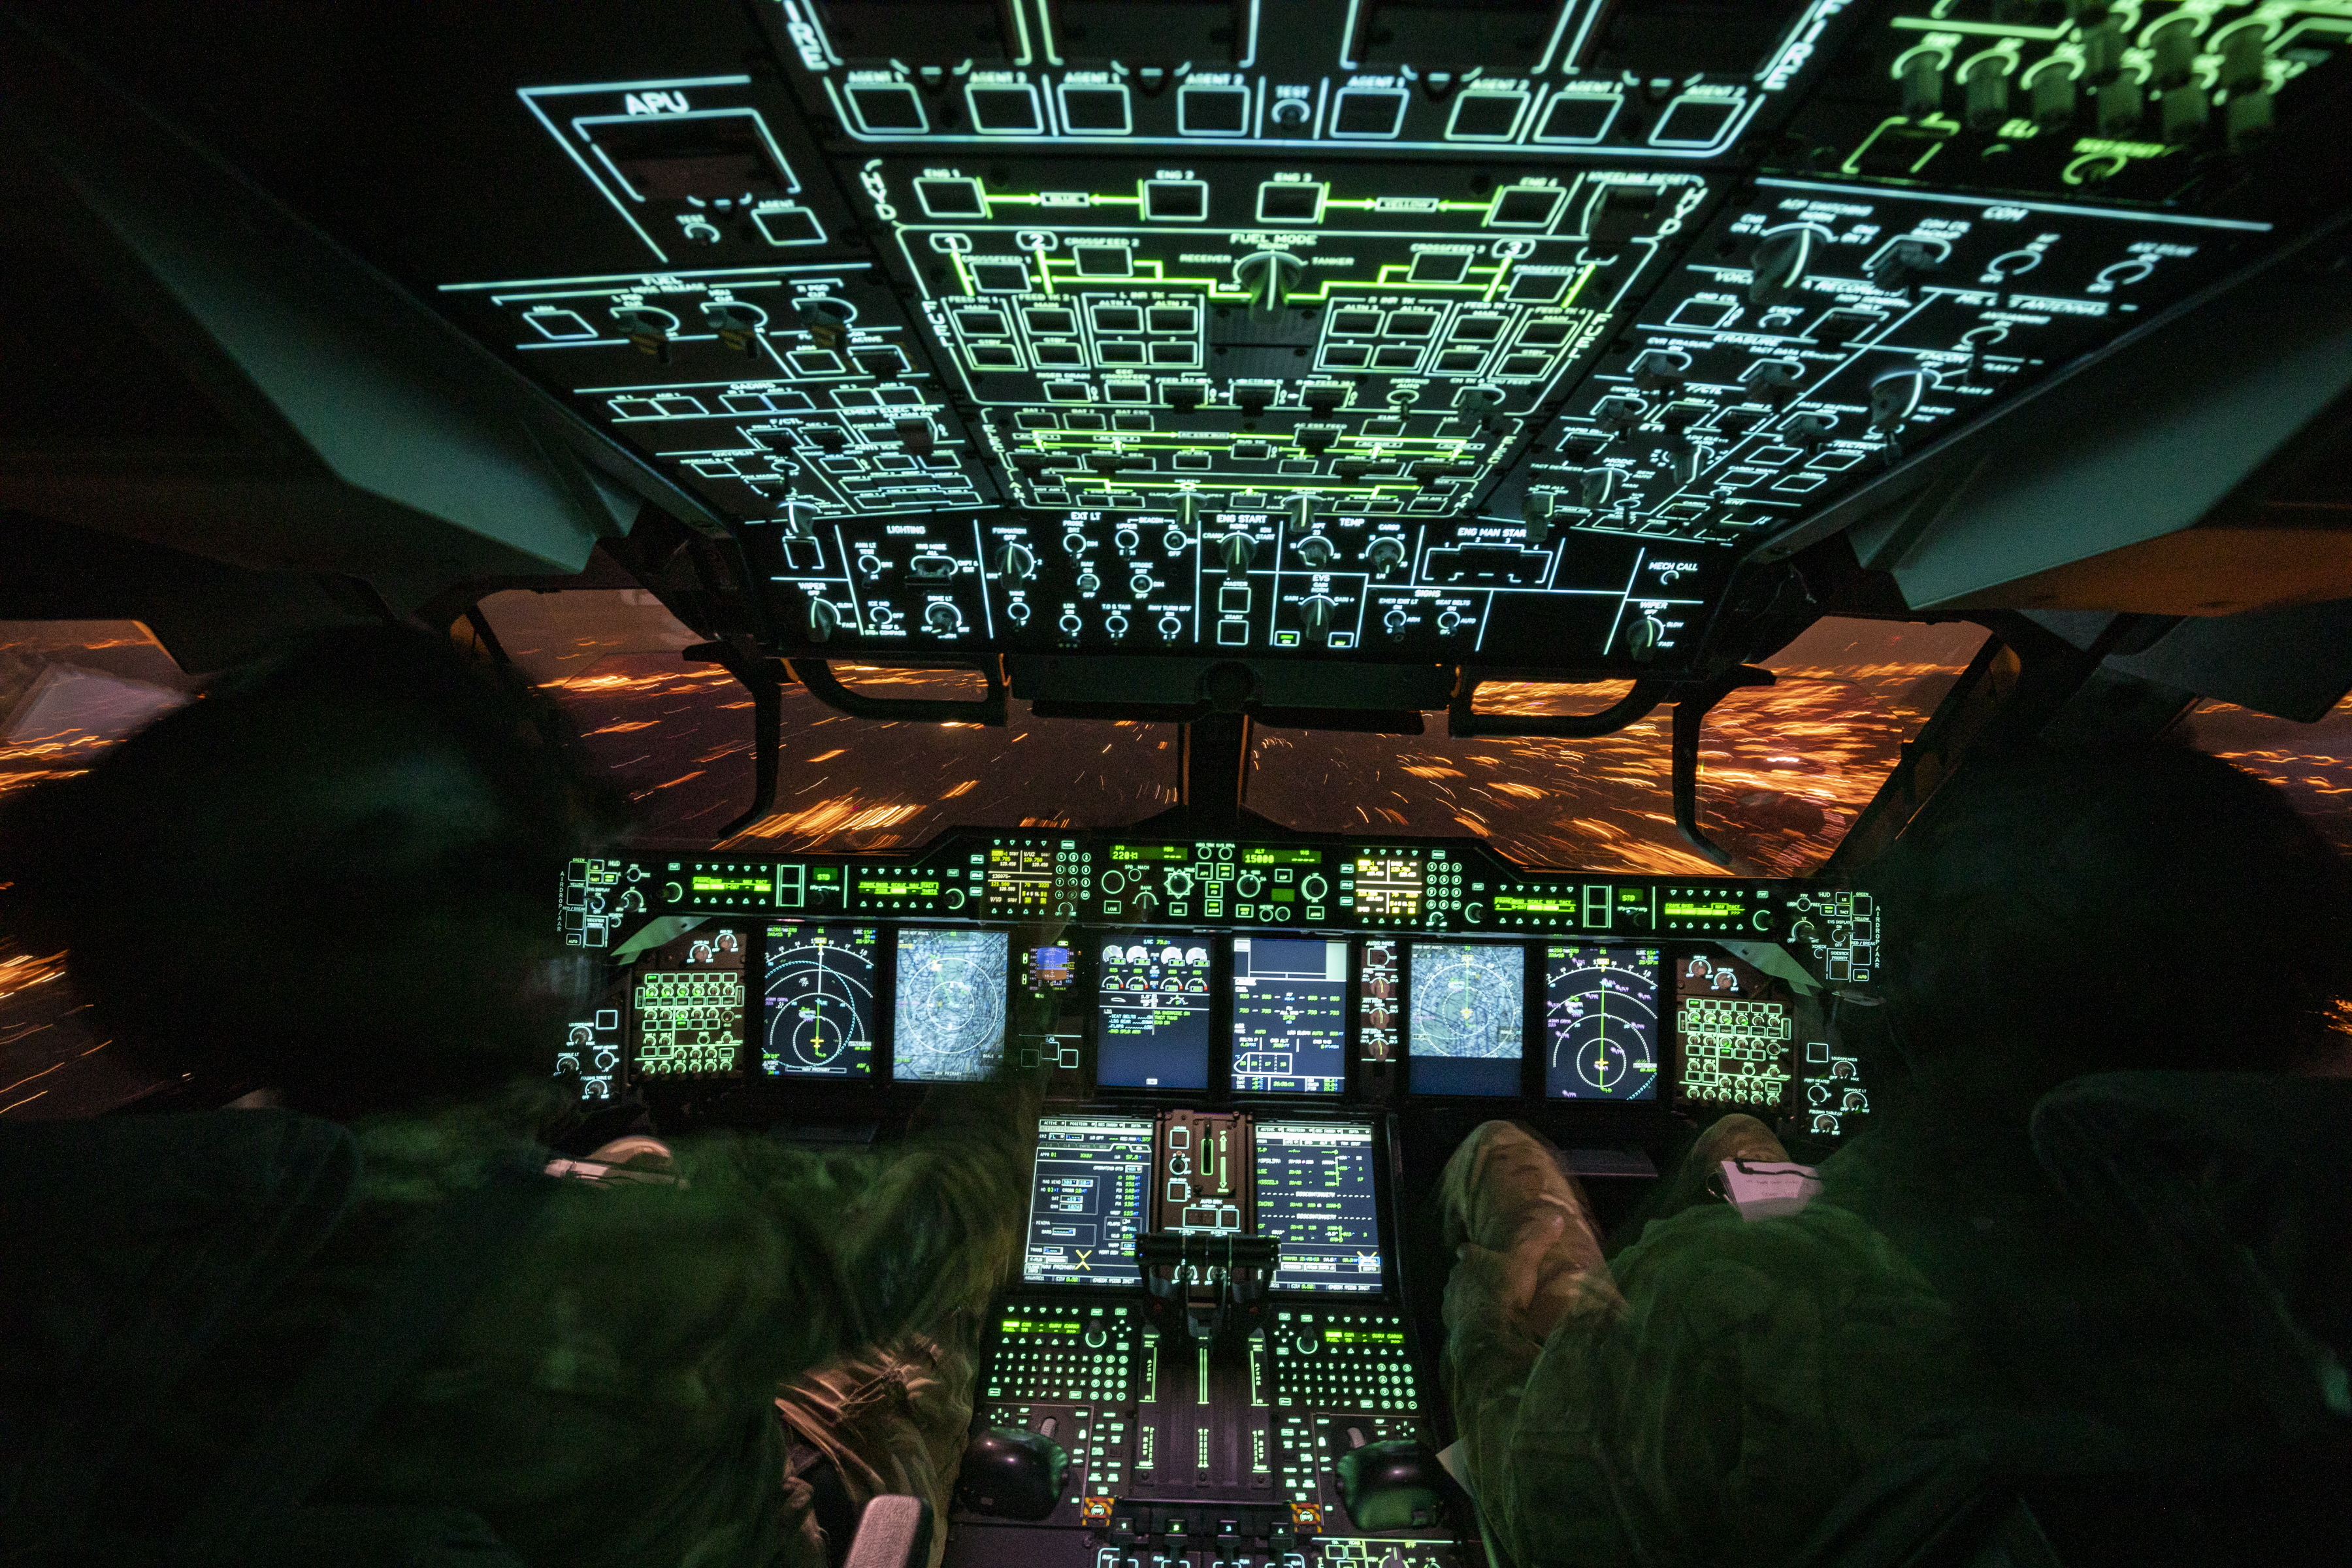 Image shows inside the cockpit of a RAF Atlas aircraft.